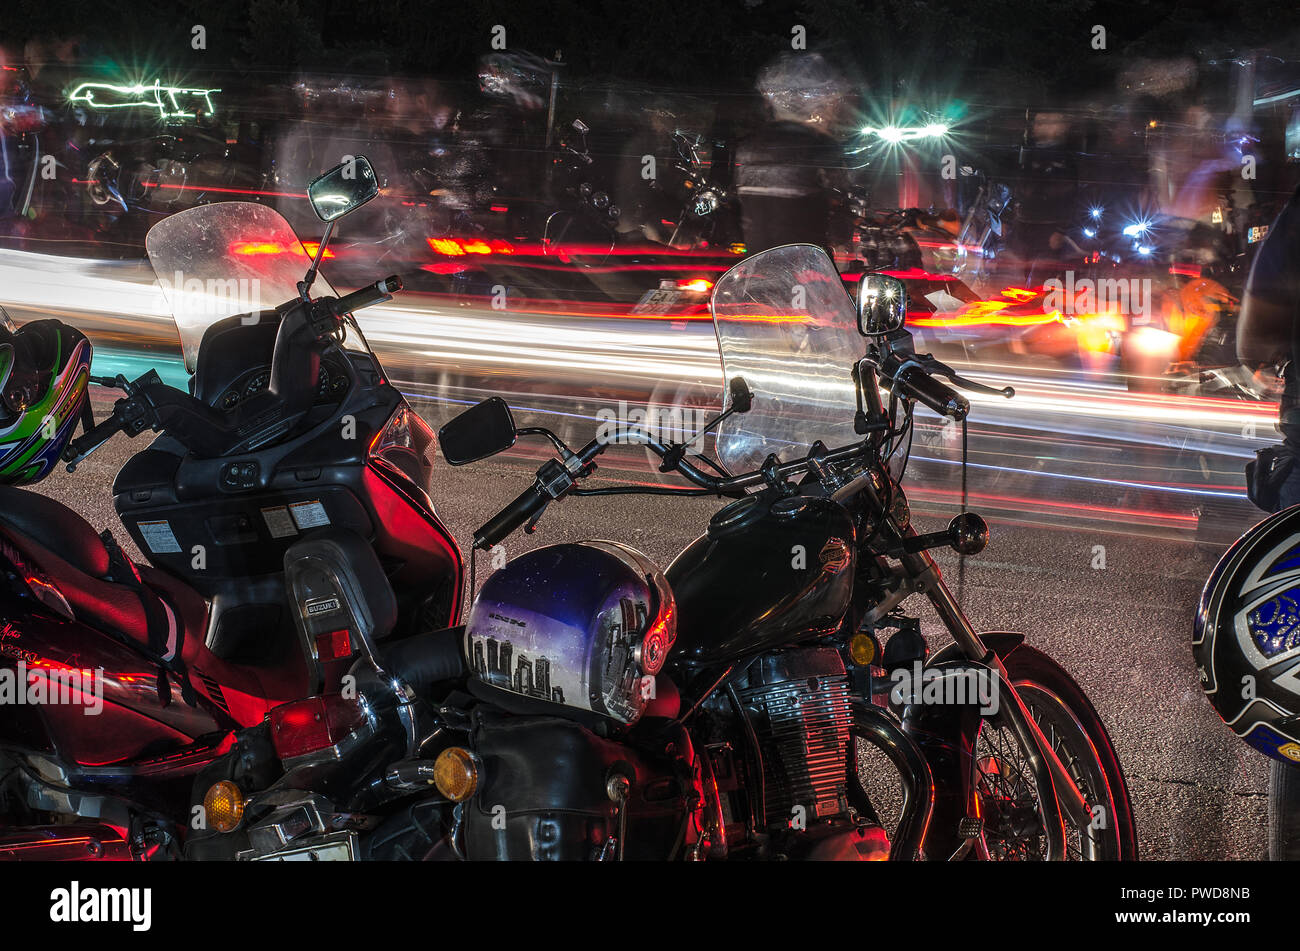 Atractive moto meeting. Many motocycle, fast speed, smoke and noise. Red  and white lights. Hign adrenaline Stock Photo - Alamy